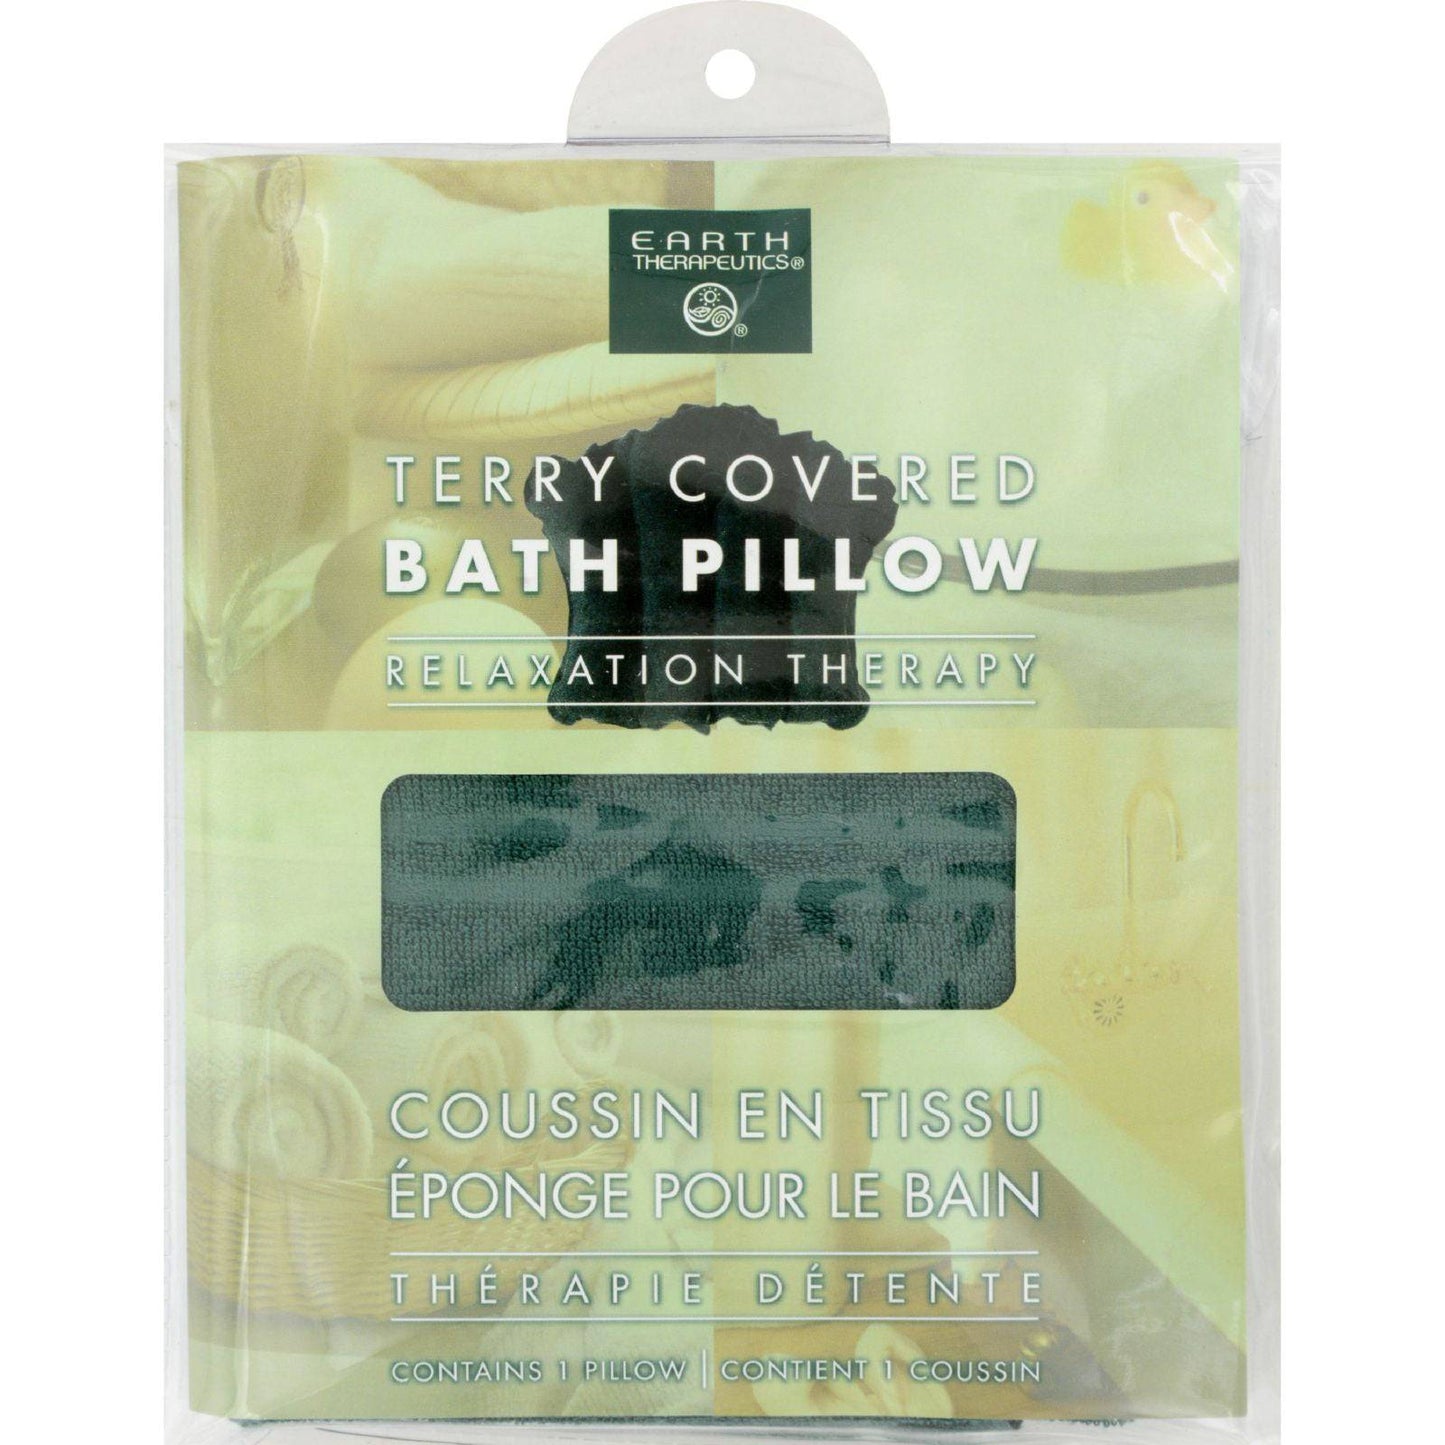 Earth Therapeutics Terry Covered Bath Pillow Dark Green - 1 Pillow | OnlyNaturals.us